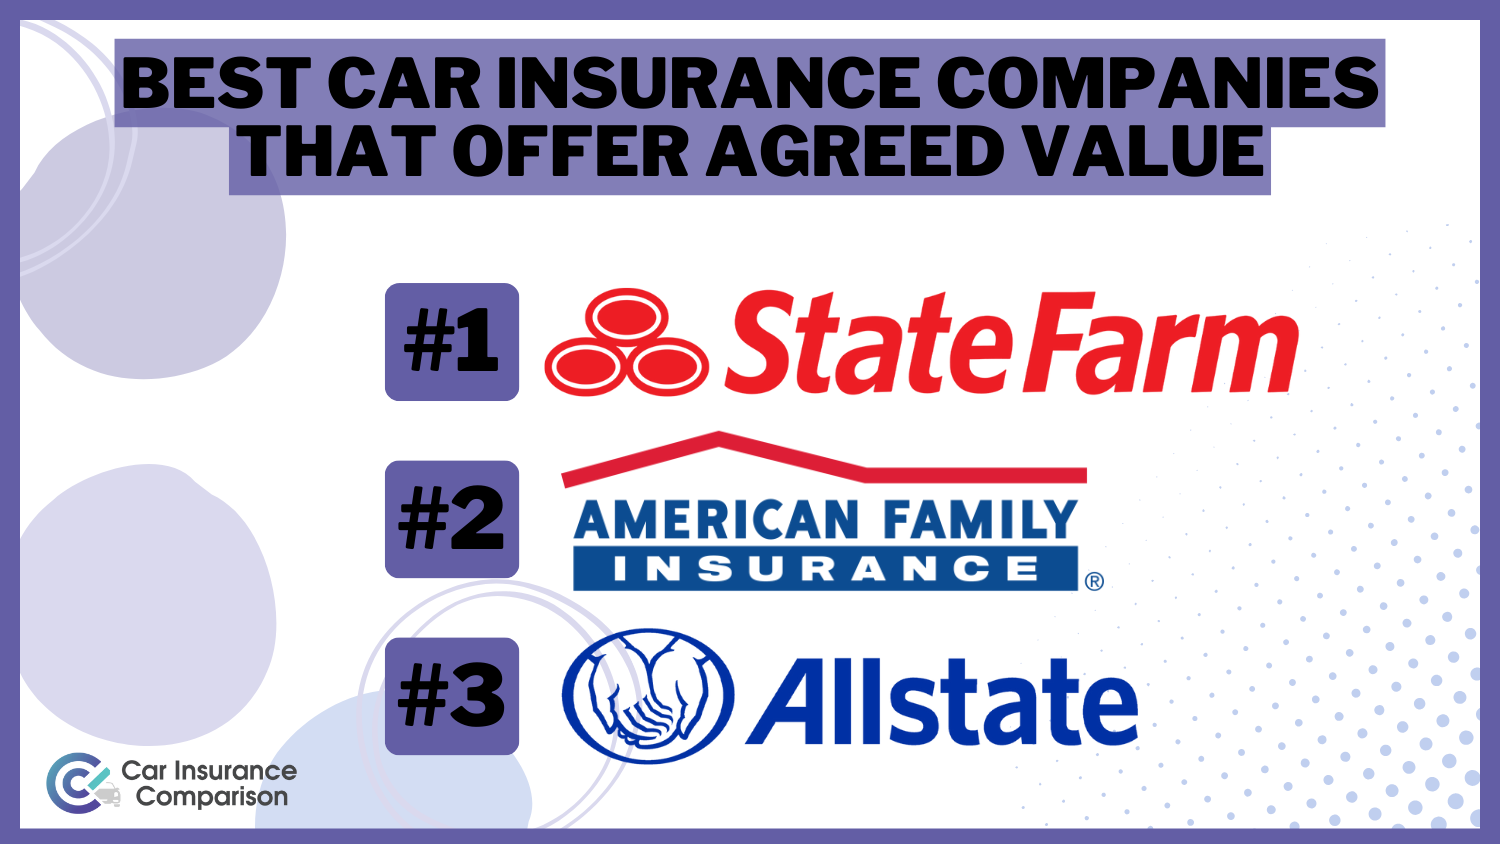 State Farm, American Family, and Allstate: Best Car Insurance Companies That Offer Agreed Value